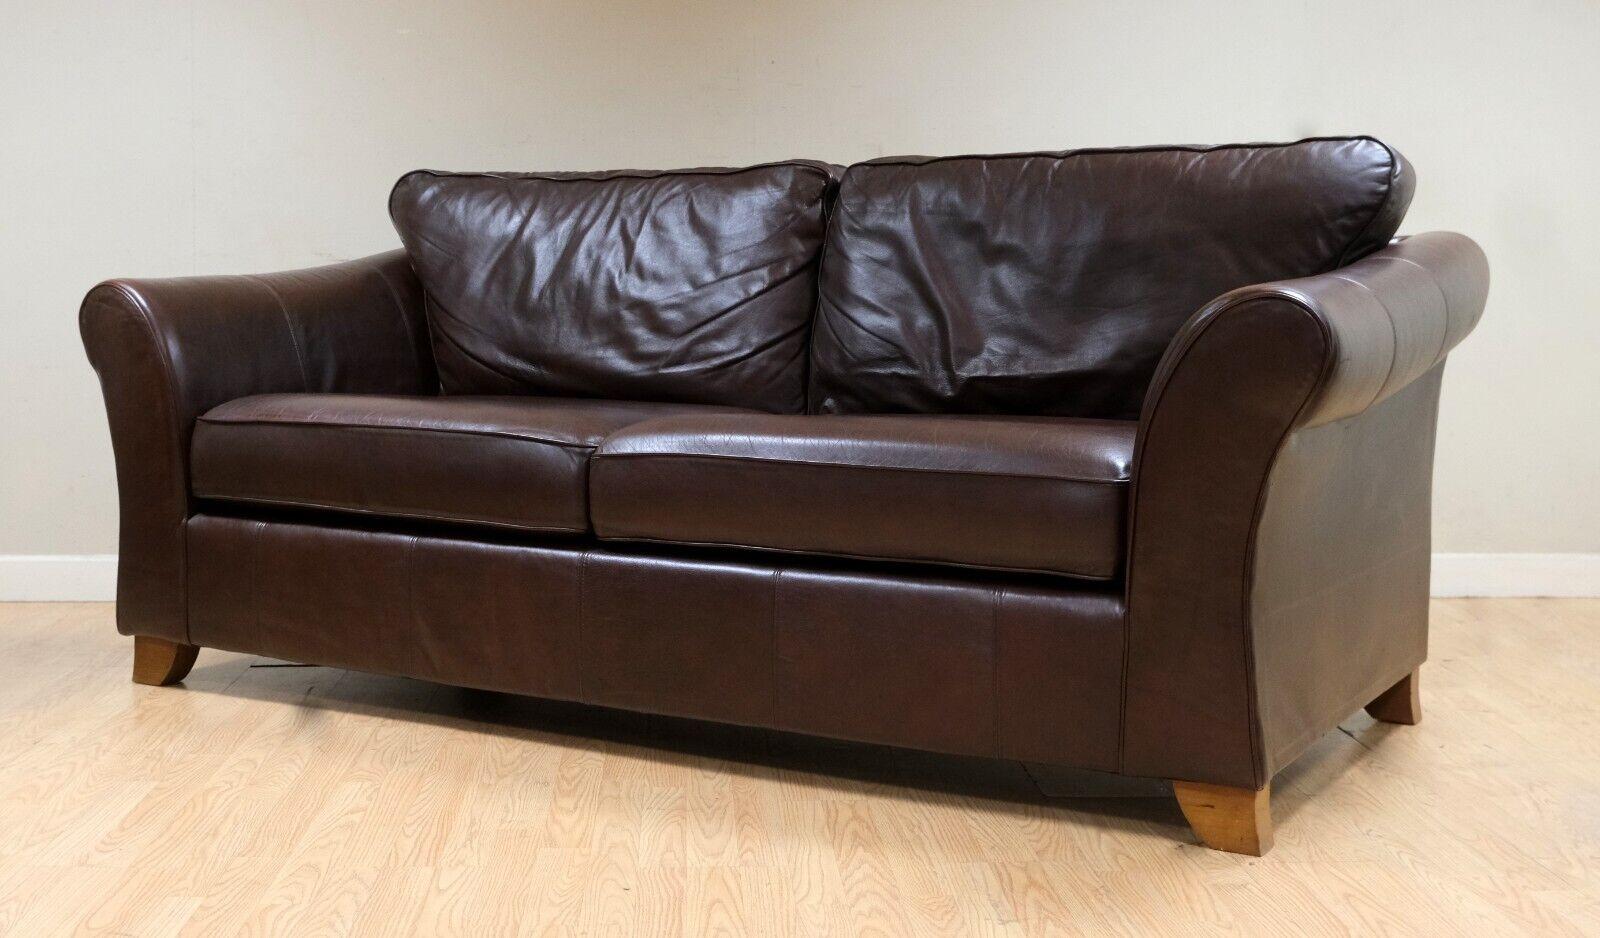 We are delighted to offer for sale this elegant Marks & Spencer Abbey collection brown leather two seater sofa.

This sothiphicated and soft leather sofa is ideal for any room as the design will never be out of fashion. Marks & Spencer is well known